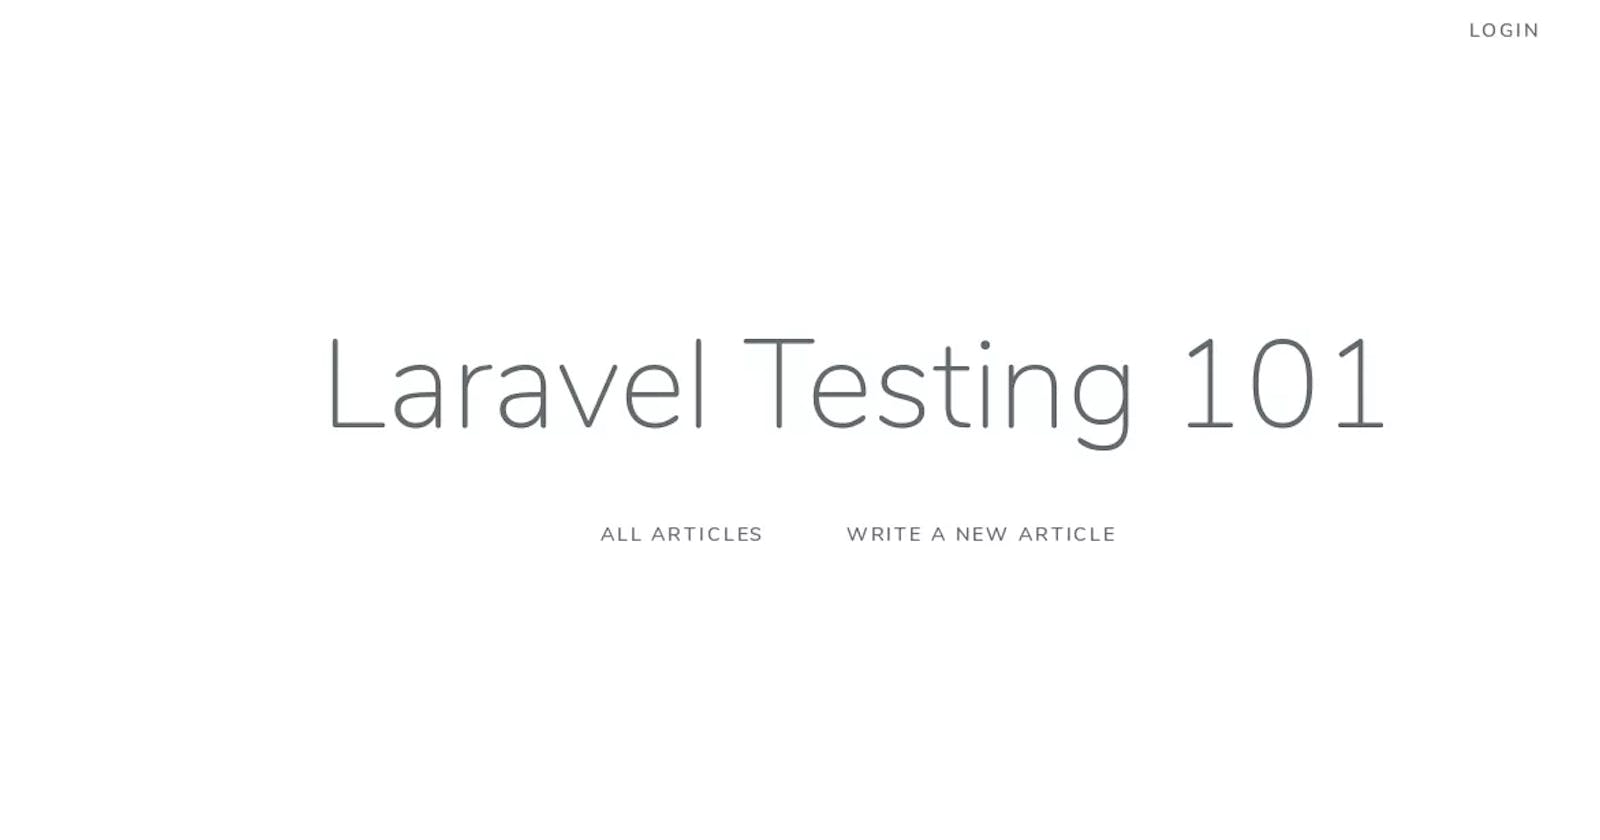 Adding Tests to your Laravel CRUD Application: Where to Start?